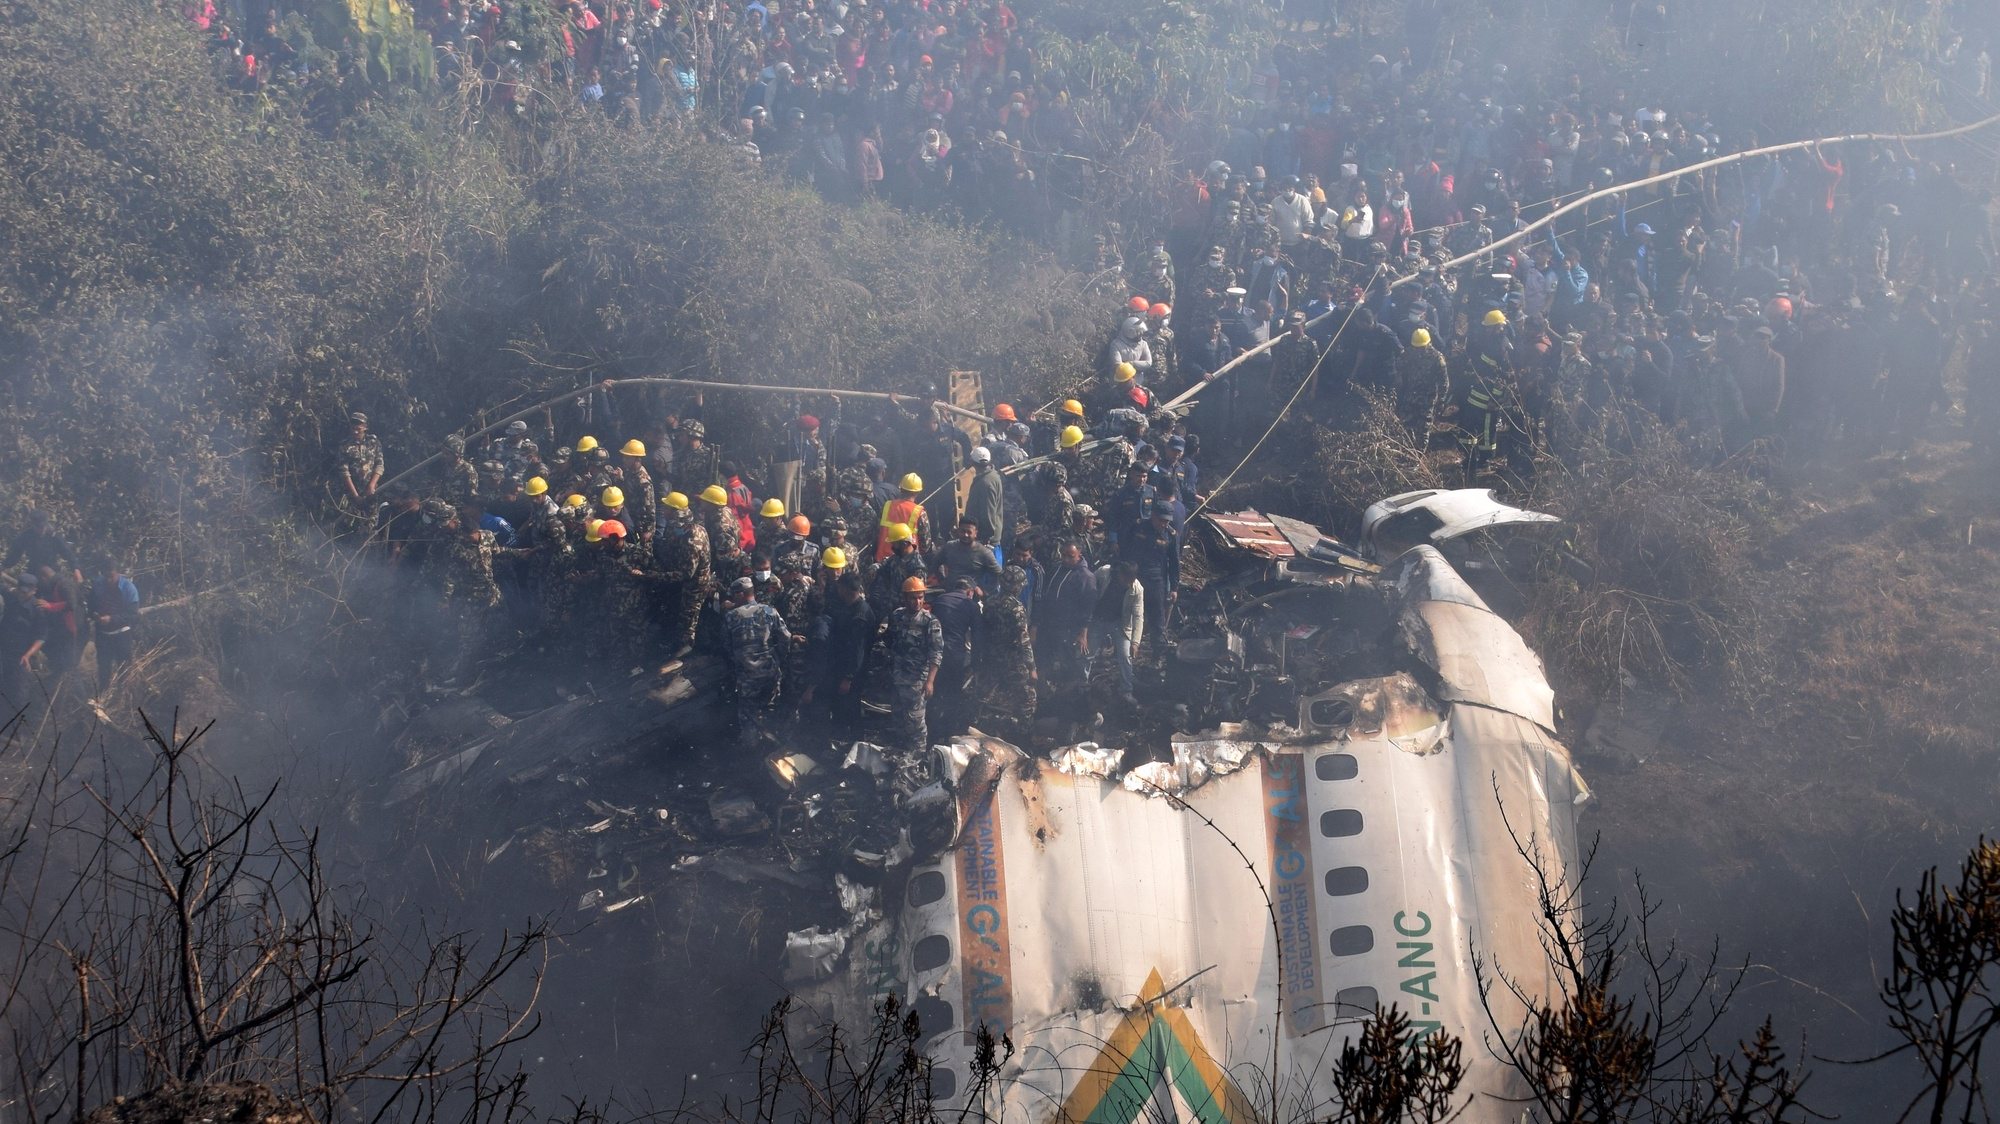 epaselect epa10406958 A general view of rescue teams working near the wreckage at the crash site of a Yeti Airlines ATR72 aircraft in Pokhara, central Nepal, 15 January 2023. A Yeti Airlines ATR72 aircraft carrying 72 people on board, 68 passengers and 4 crew members, crashed into a gorge while trying to land at the Pokhara International Airport. According to a statement from the Civil Aviation Authority of Nepal (CAAN), at least 68 people were confirmed dead.  EPA/KRISHNA MANI BARAL